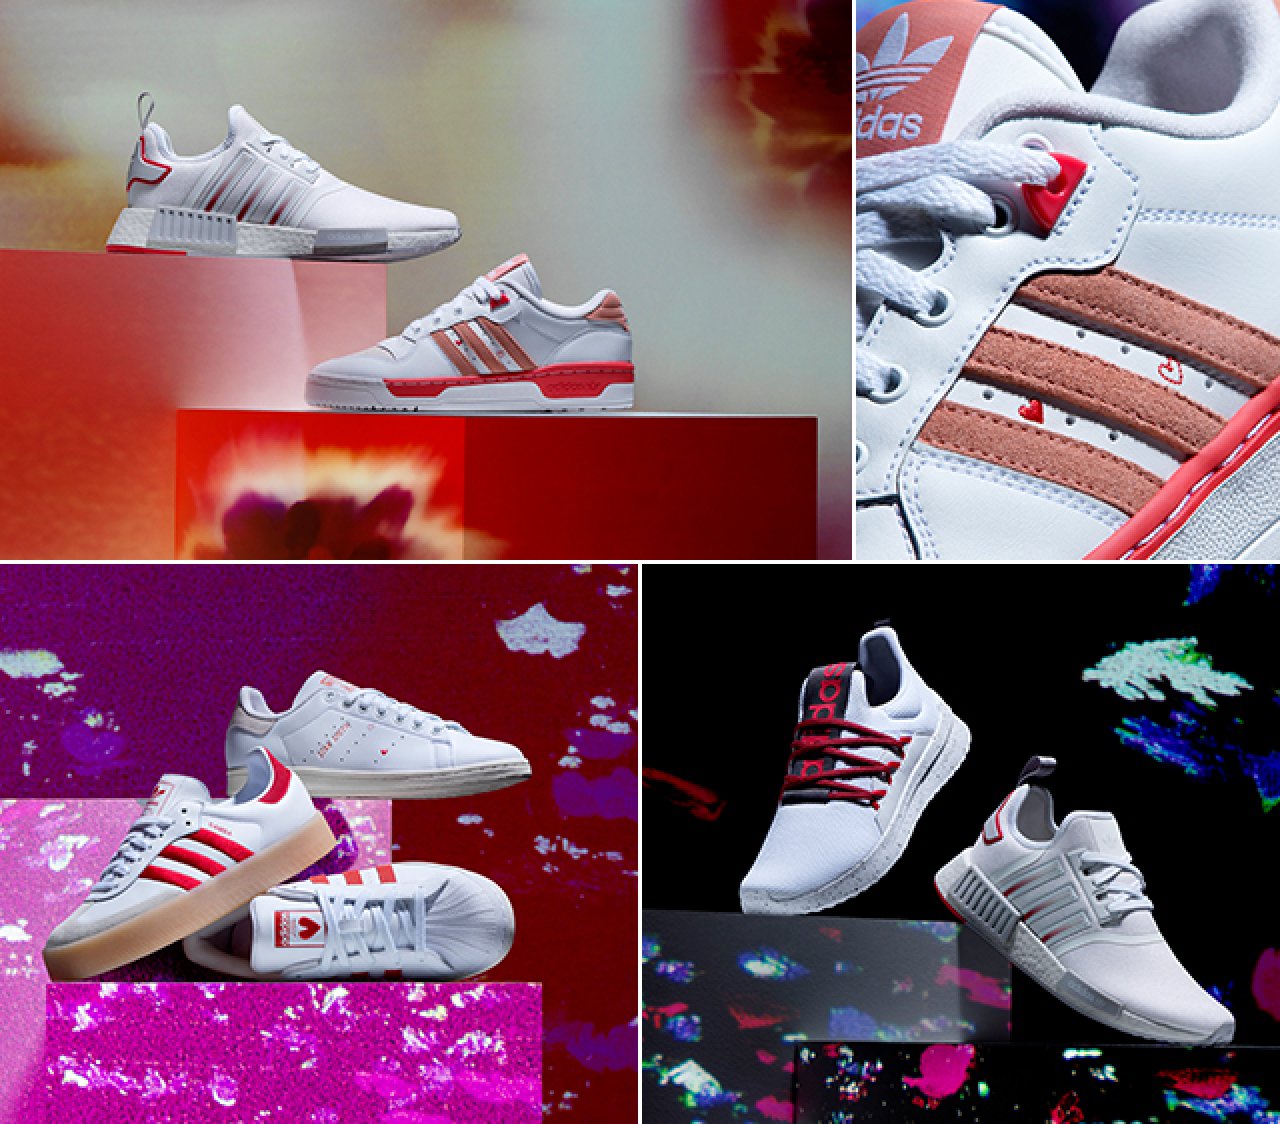 Valentine’s-inspired sneakers and apparel for you and your loved ones.